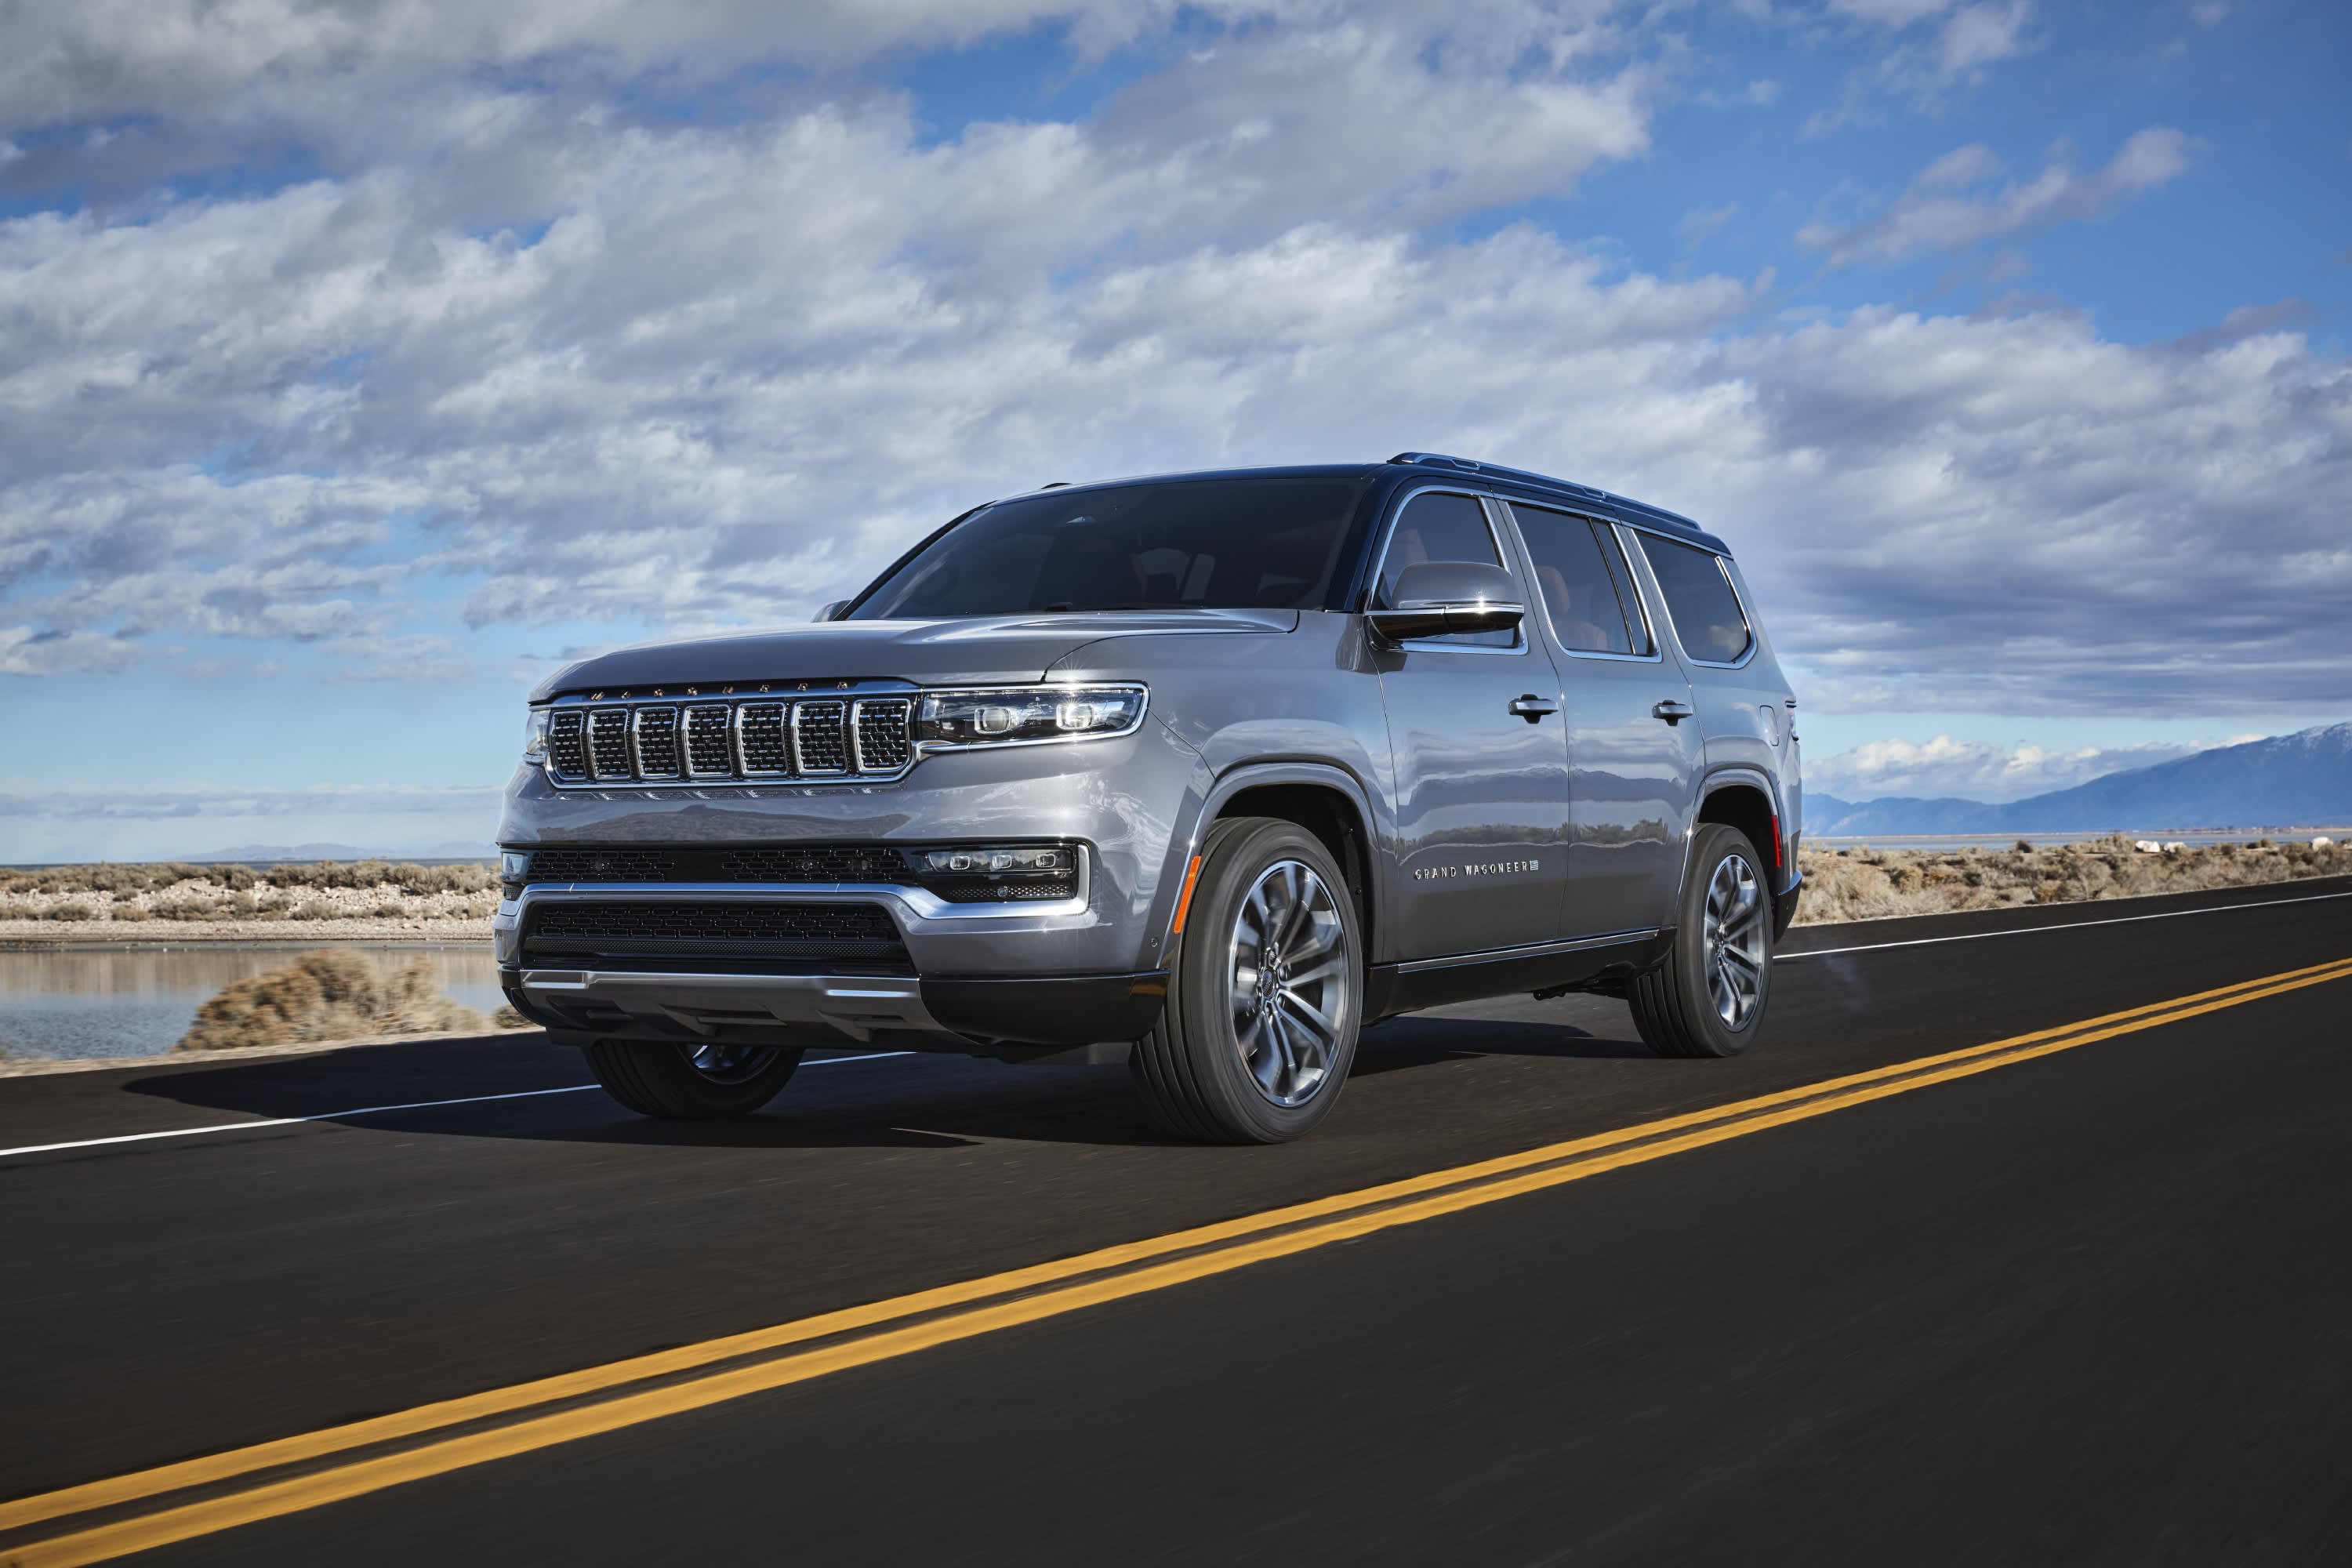 Jeep unveils long-awaited Grand Wagoneer SUV topping $111,000